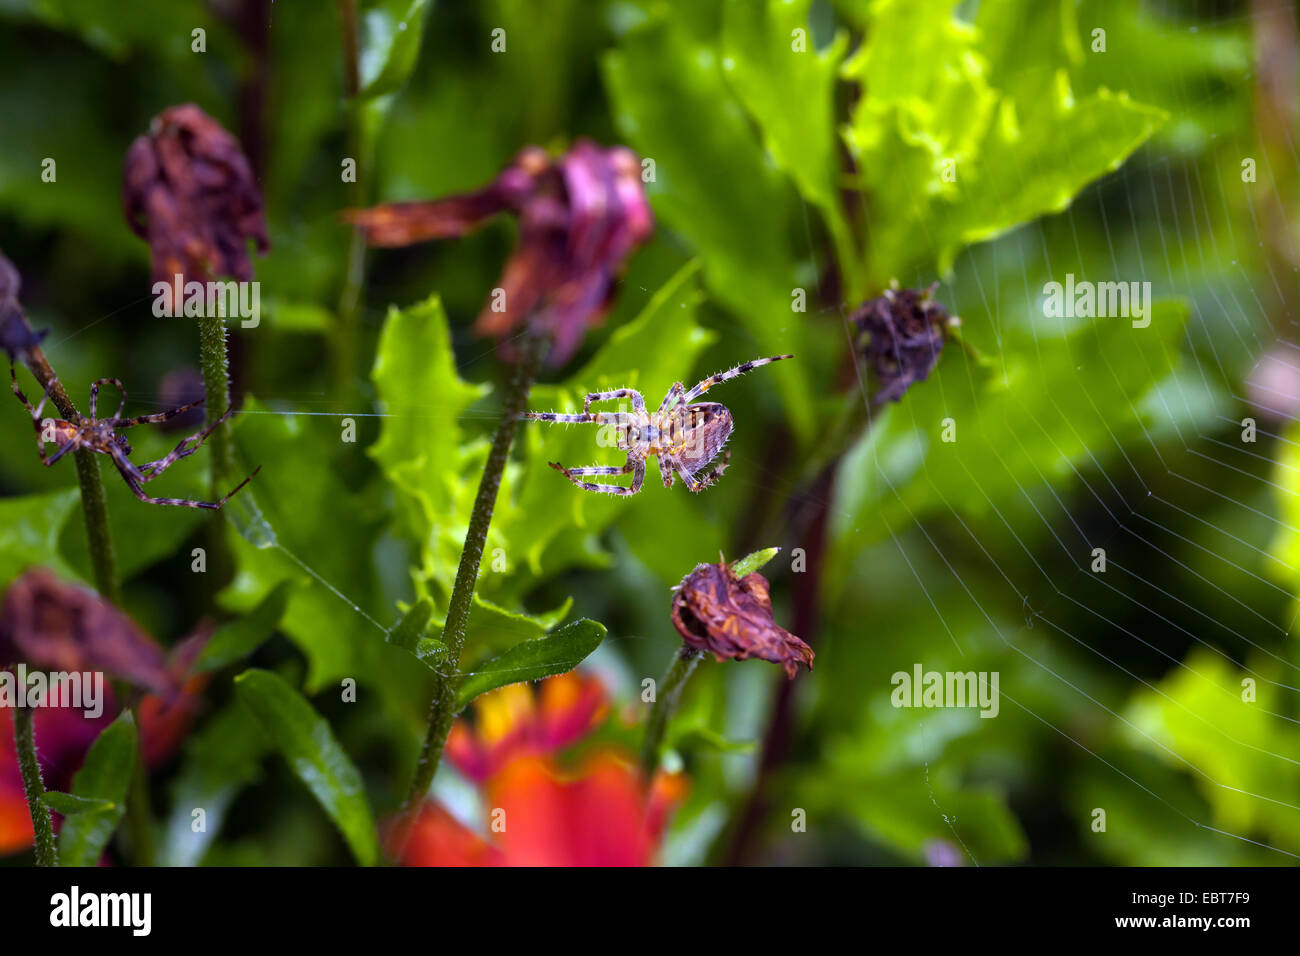 Two Garden Spiders defending their territory. Stock Photo